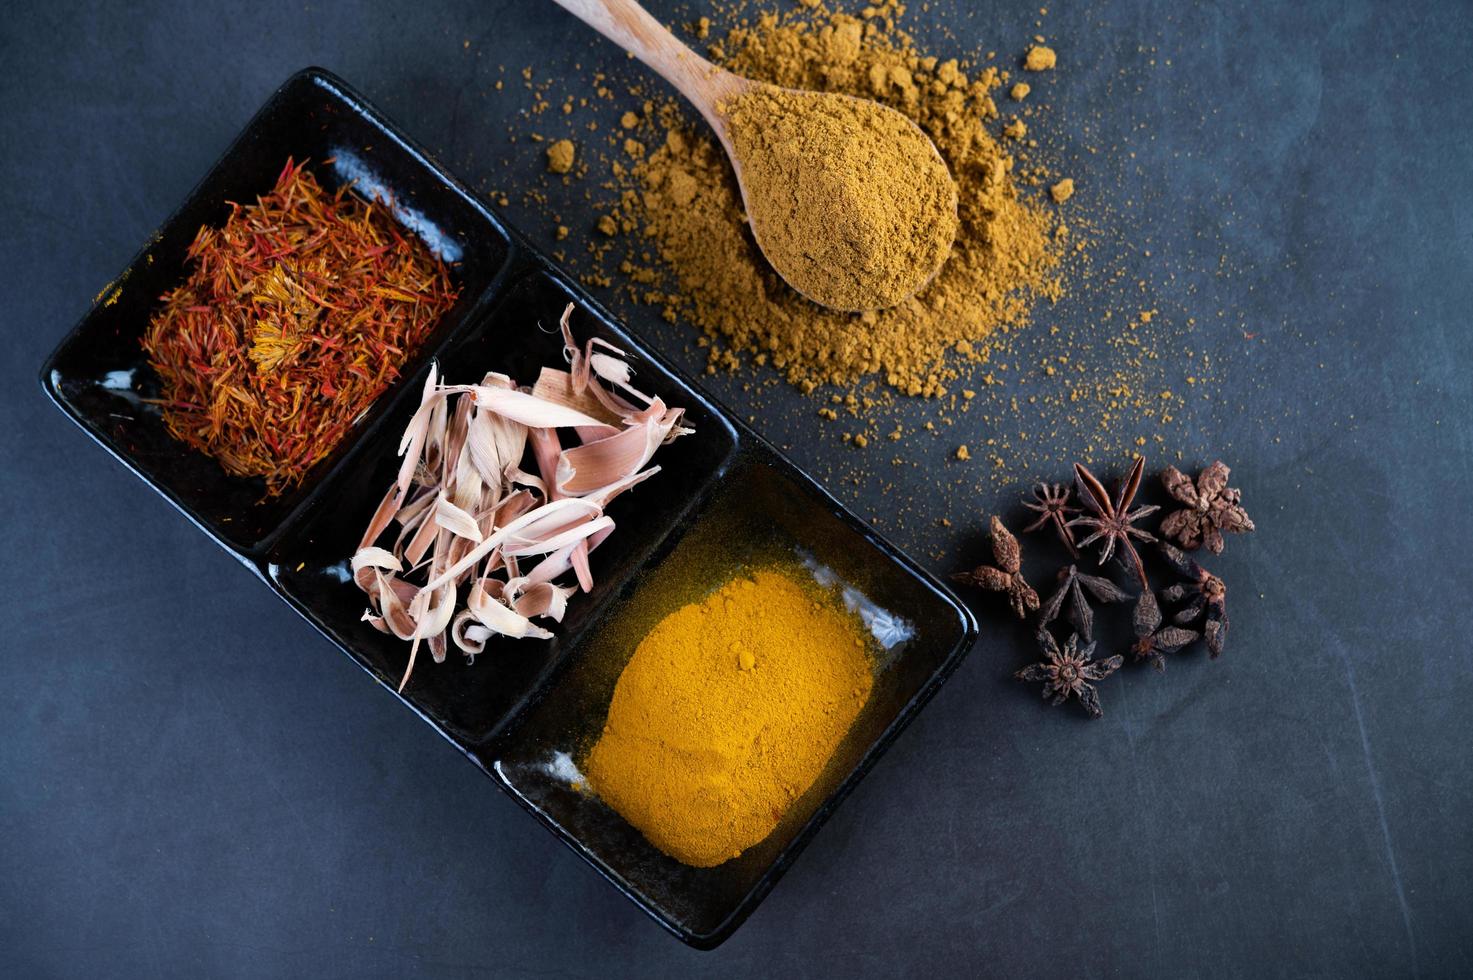 Spices on a gray kitchen surface photo